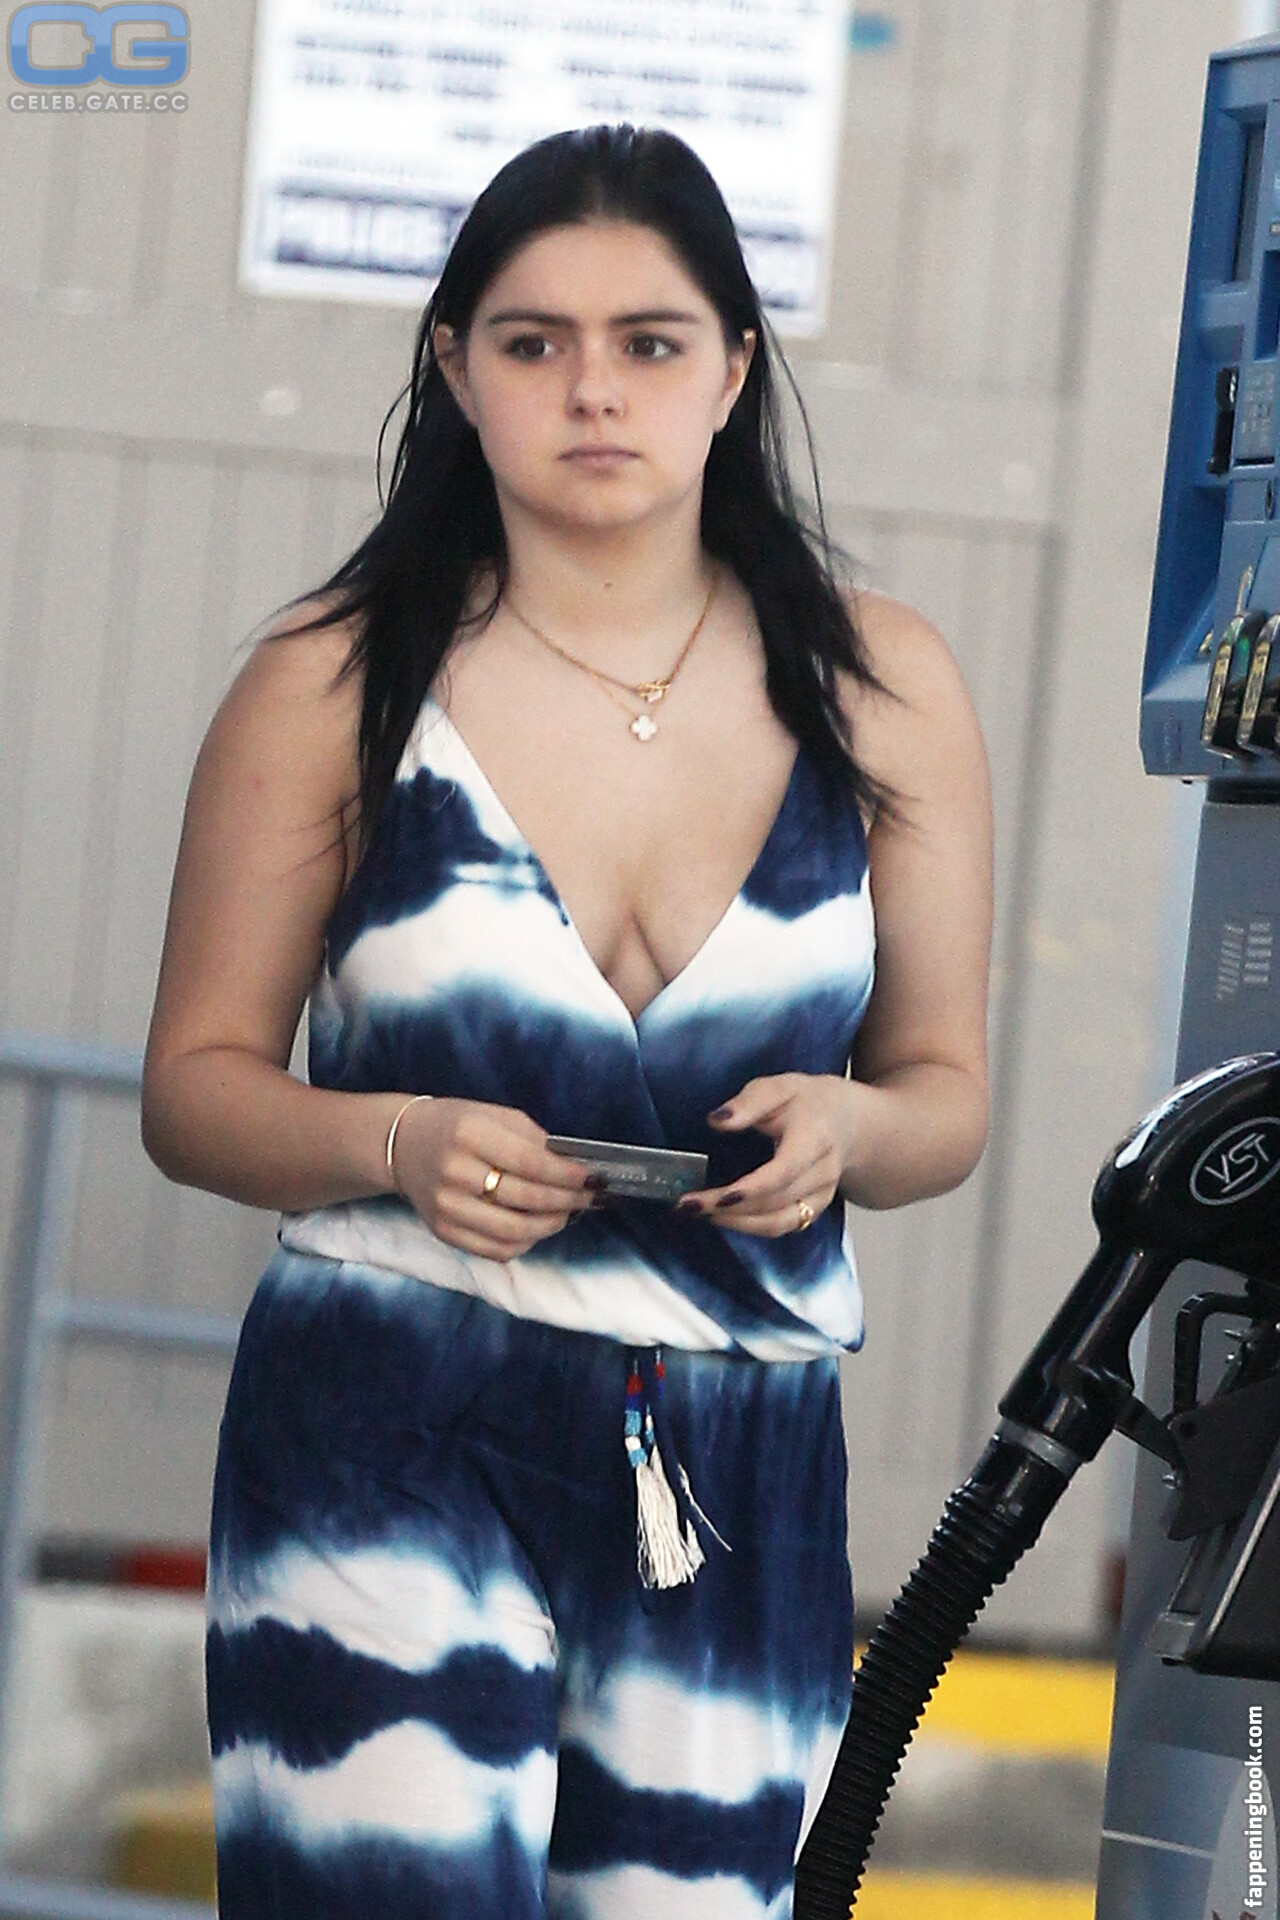 Ariel Winter Nude The Fappening Photo Fappeningbook